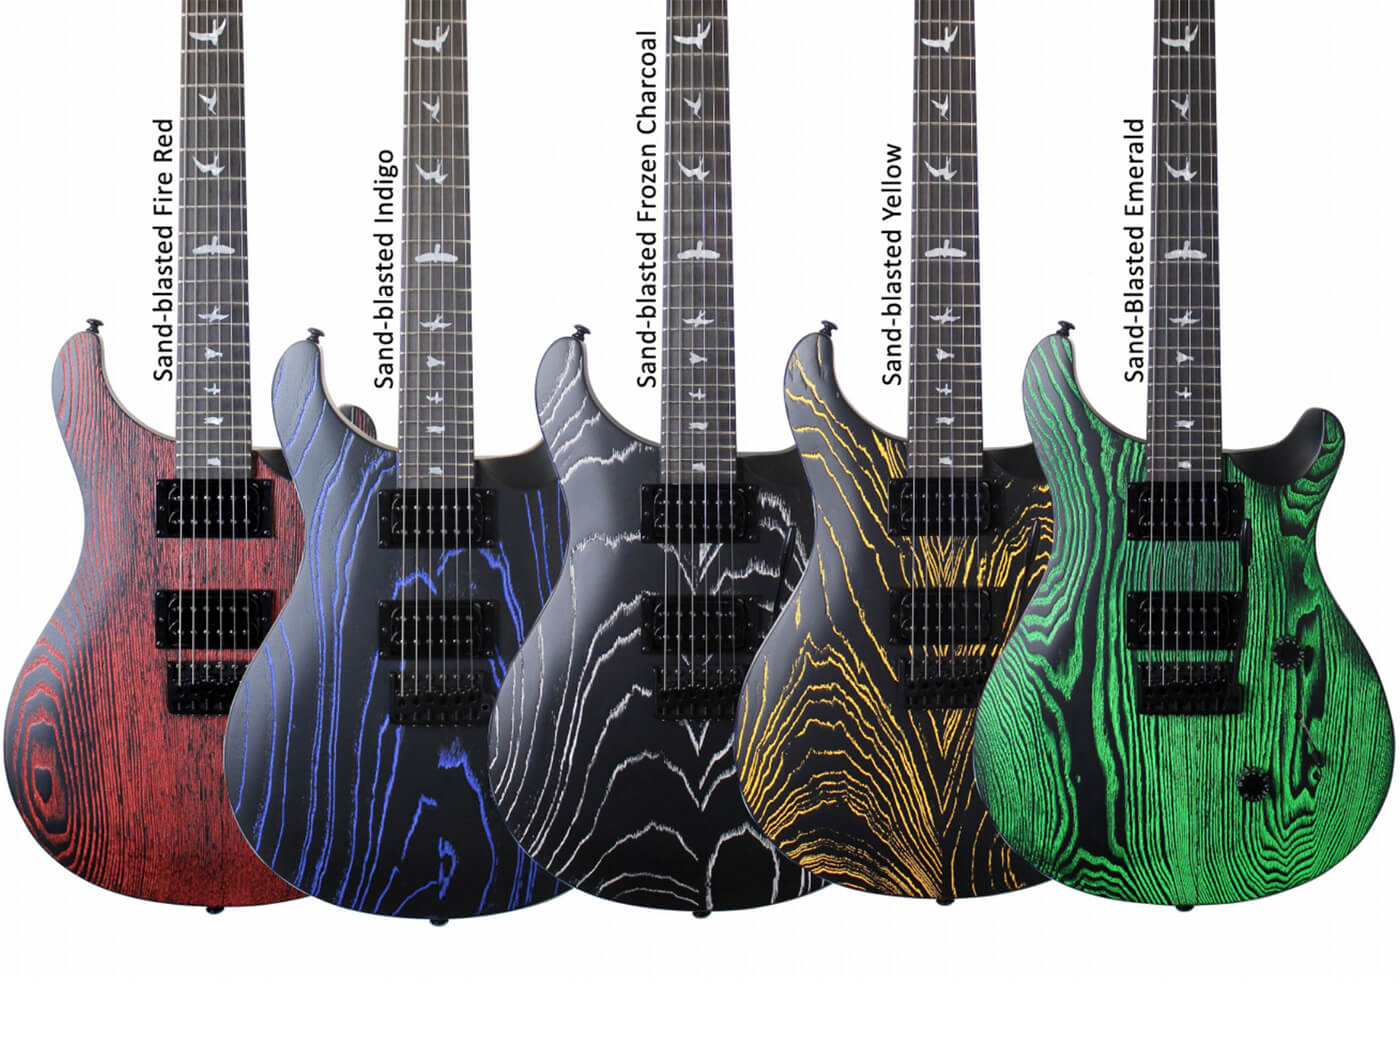 The available colours for the PRS SE Ltd Sandblasted Swamp Ash